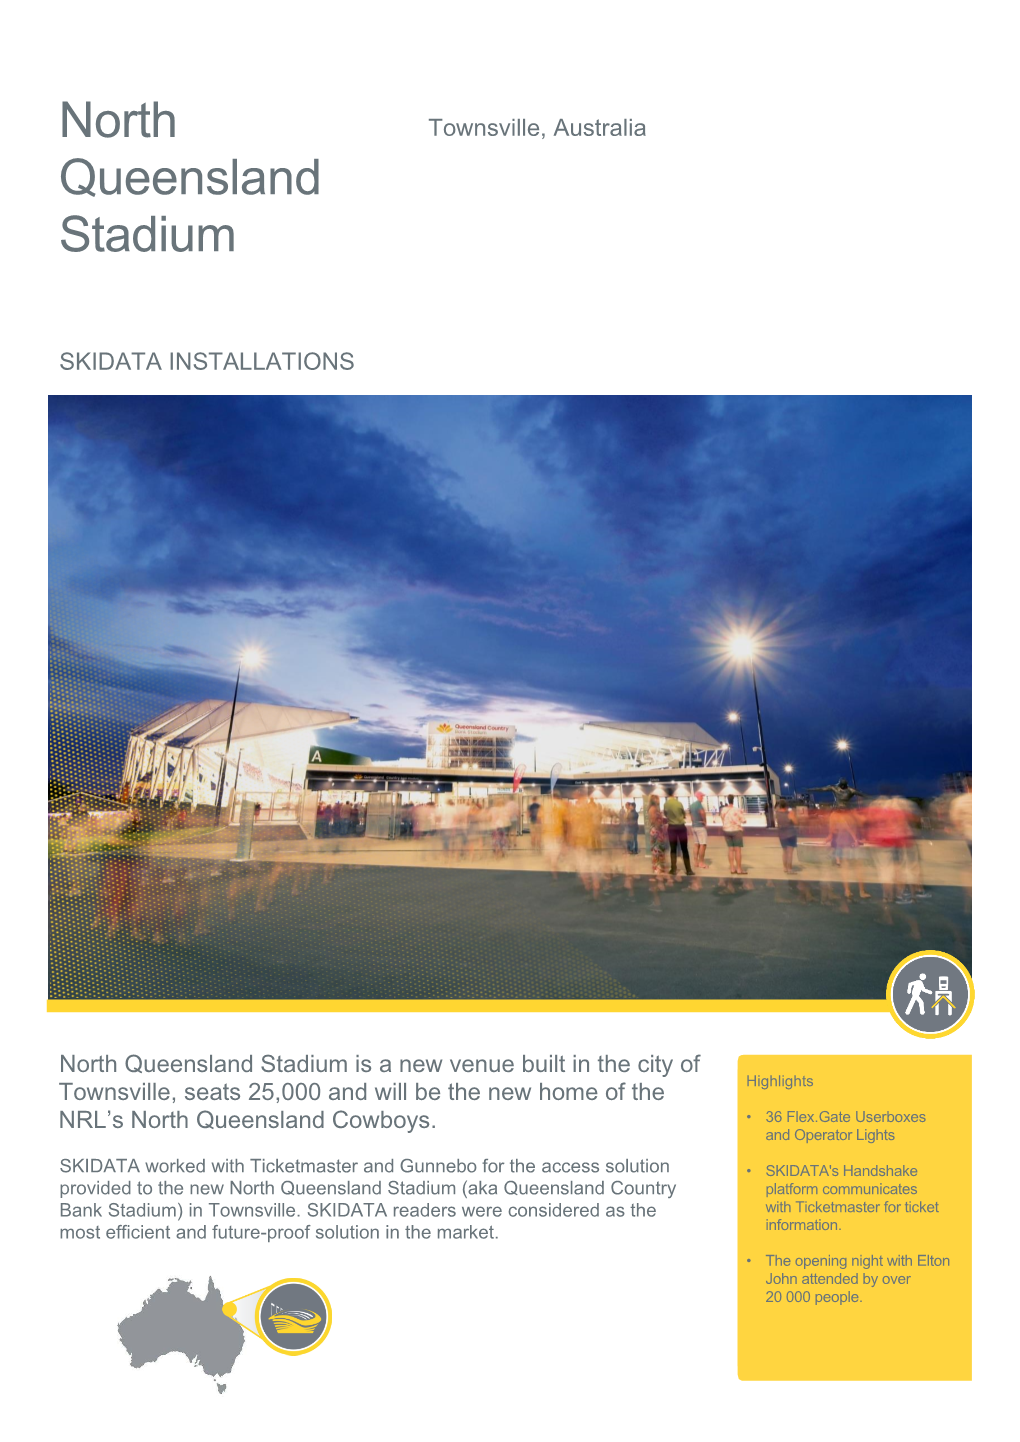 North Queensland Stadium Is a New Venue Built in the City of Highlights Townsville, Seats 25,000 and Will Be the New Home of the NRL’S North Queensland Cowboys